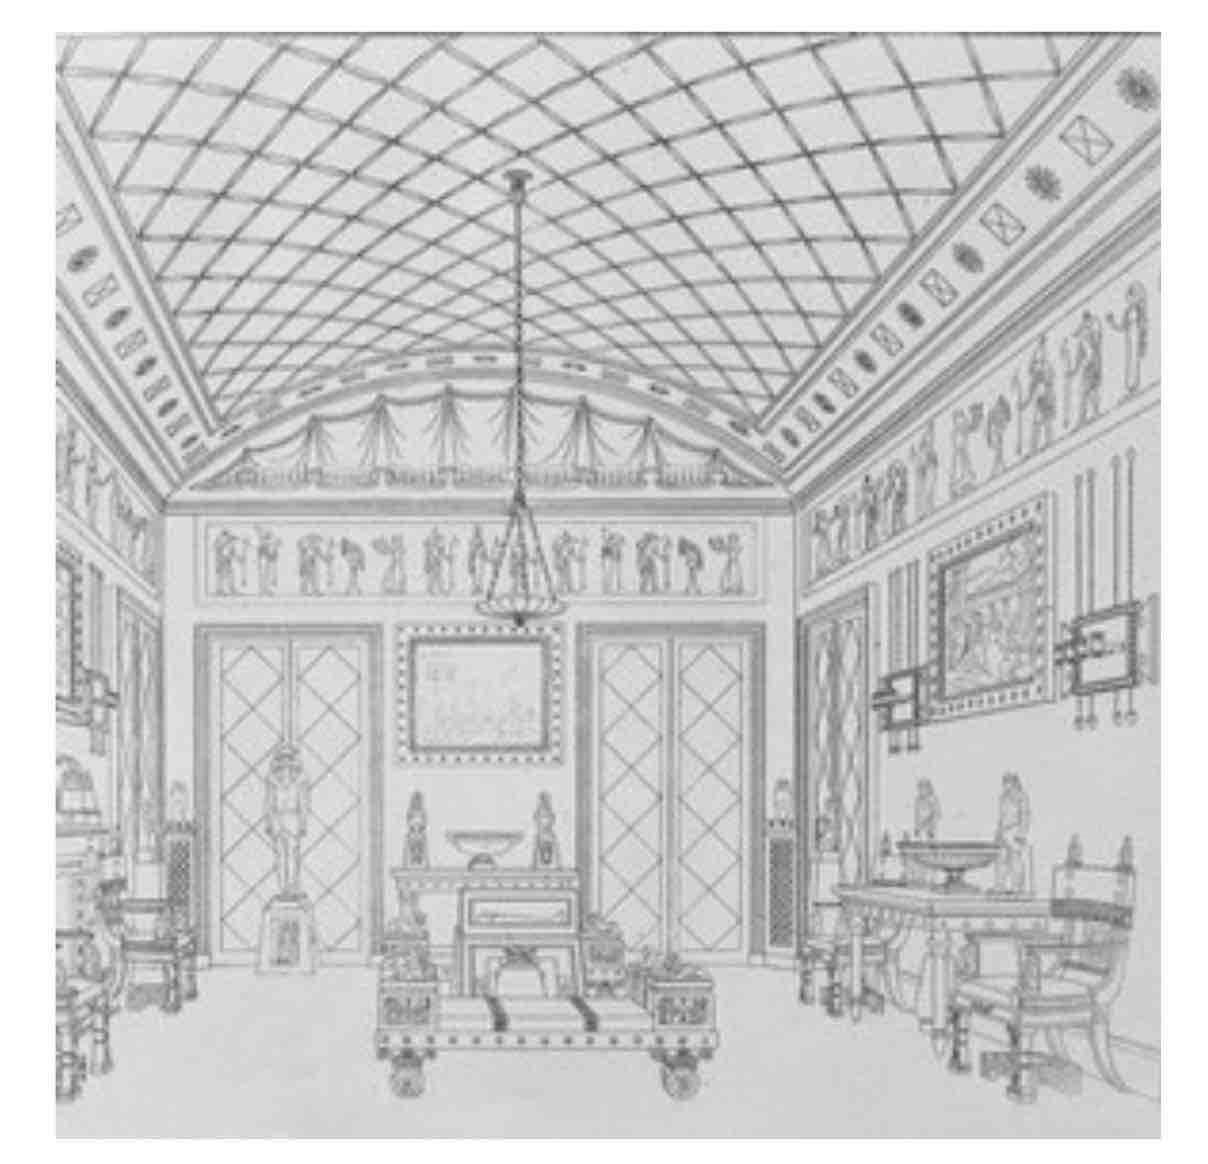 Egyptian Room at Duchess Street. The interior and furniture were designed by Thomas Hope. This illustration appeared in his 1807 Folio book Household Furniture and Interior Decoration